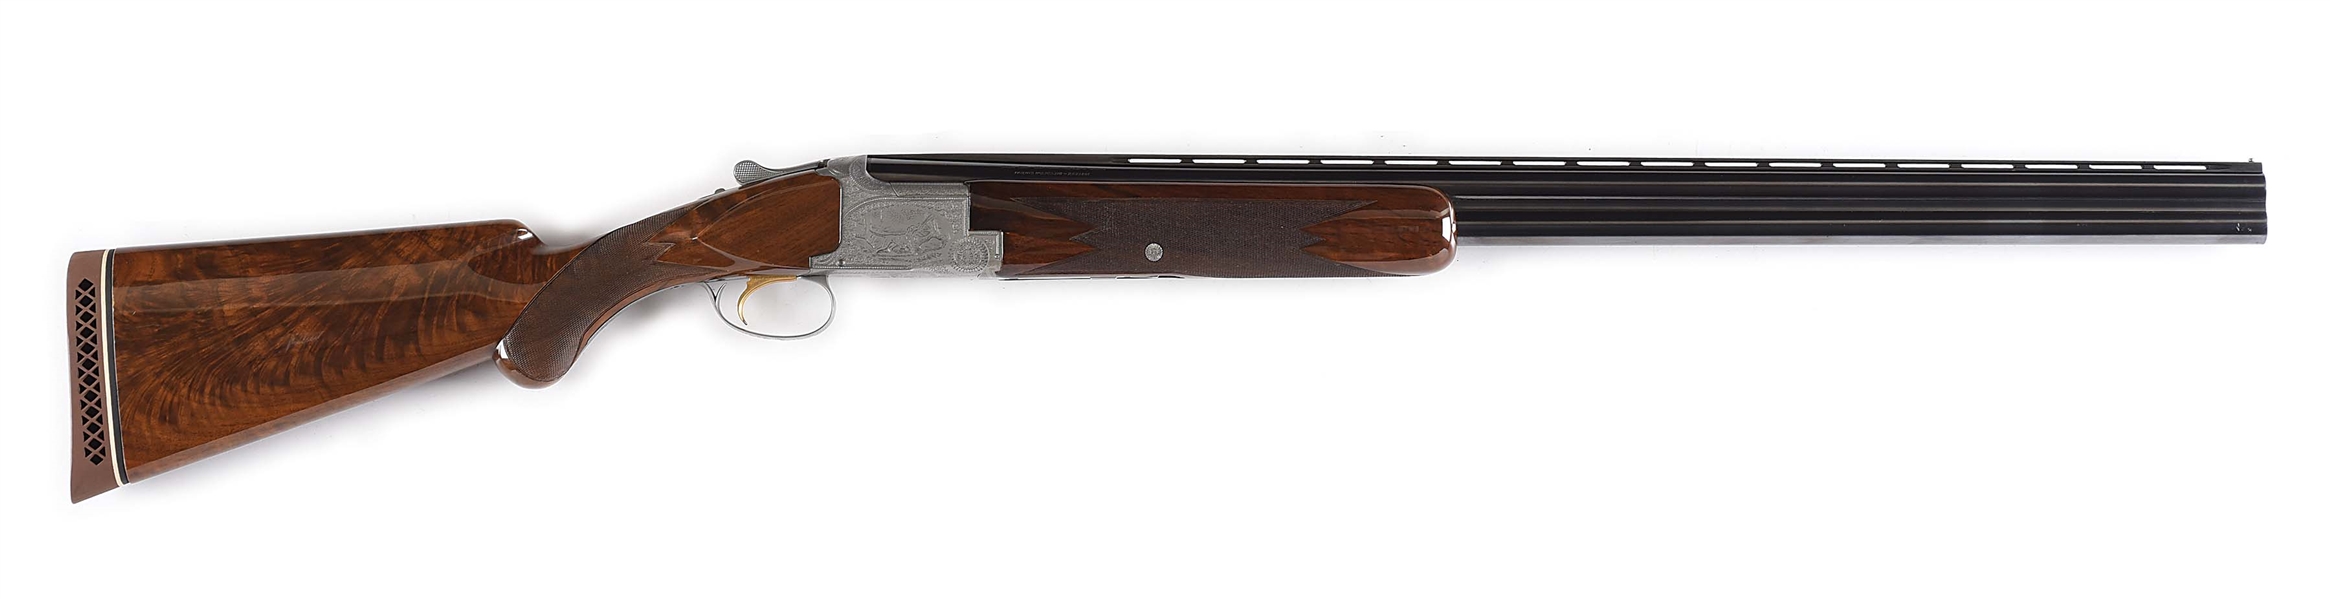 (C) VERY RARE BROWNING "POINTER" GRADE 3" MAGNUM SUPERPOSED SHOTGUN ENGRAVED BY MARECHAL WITH CASE. 